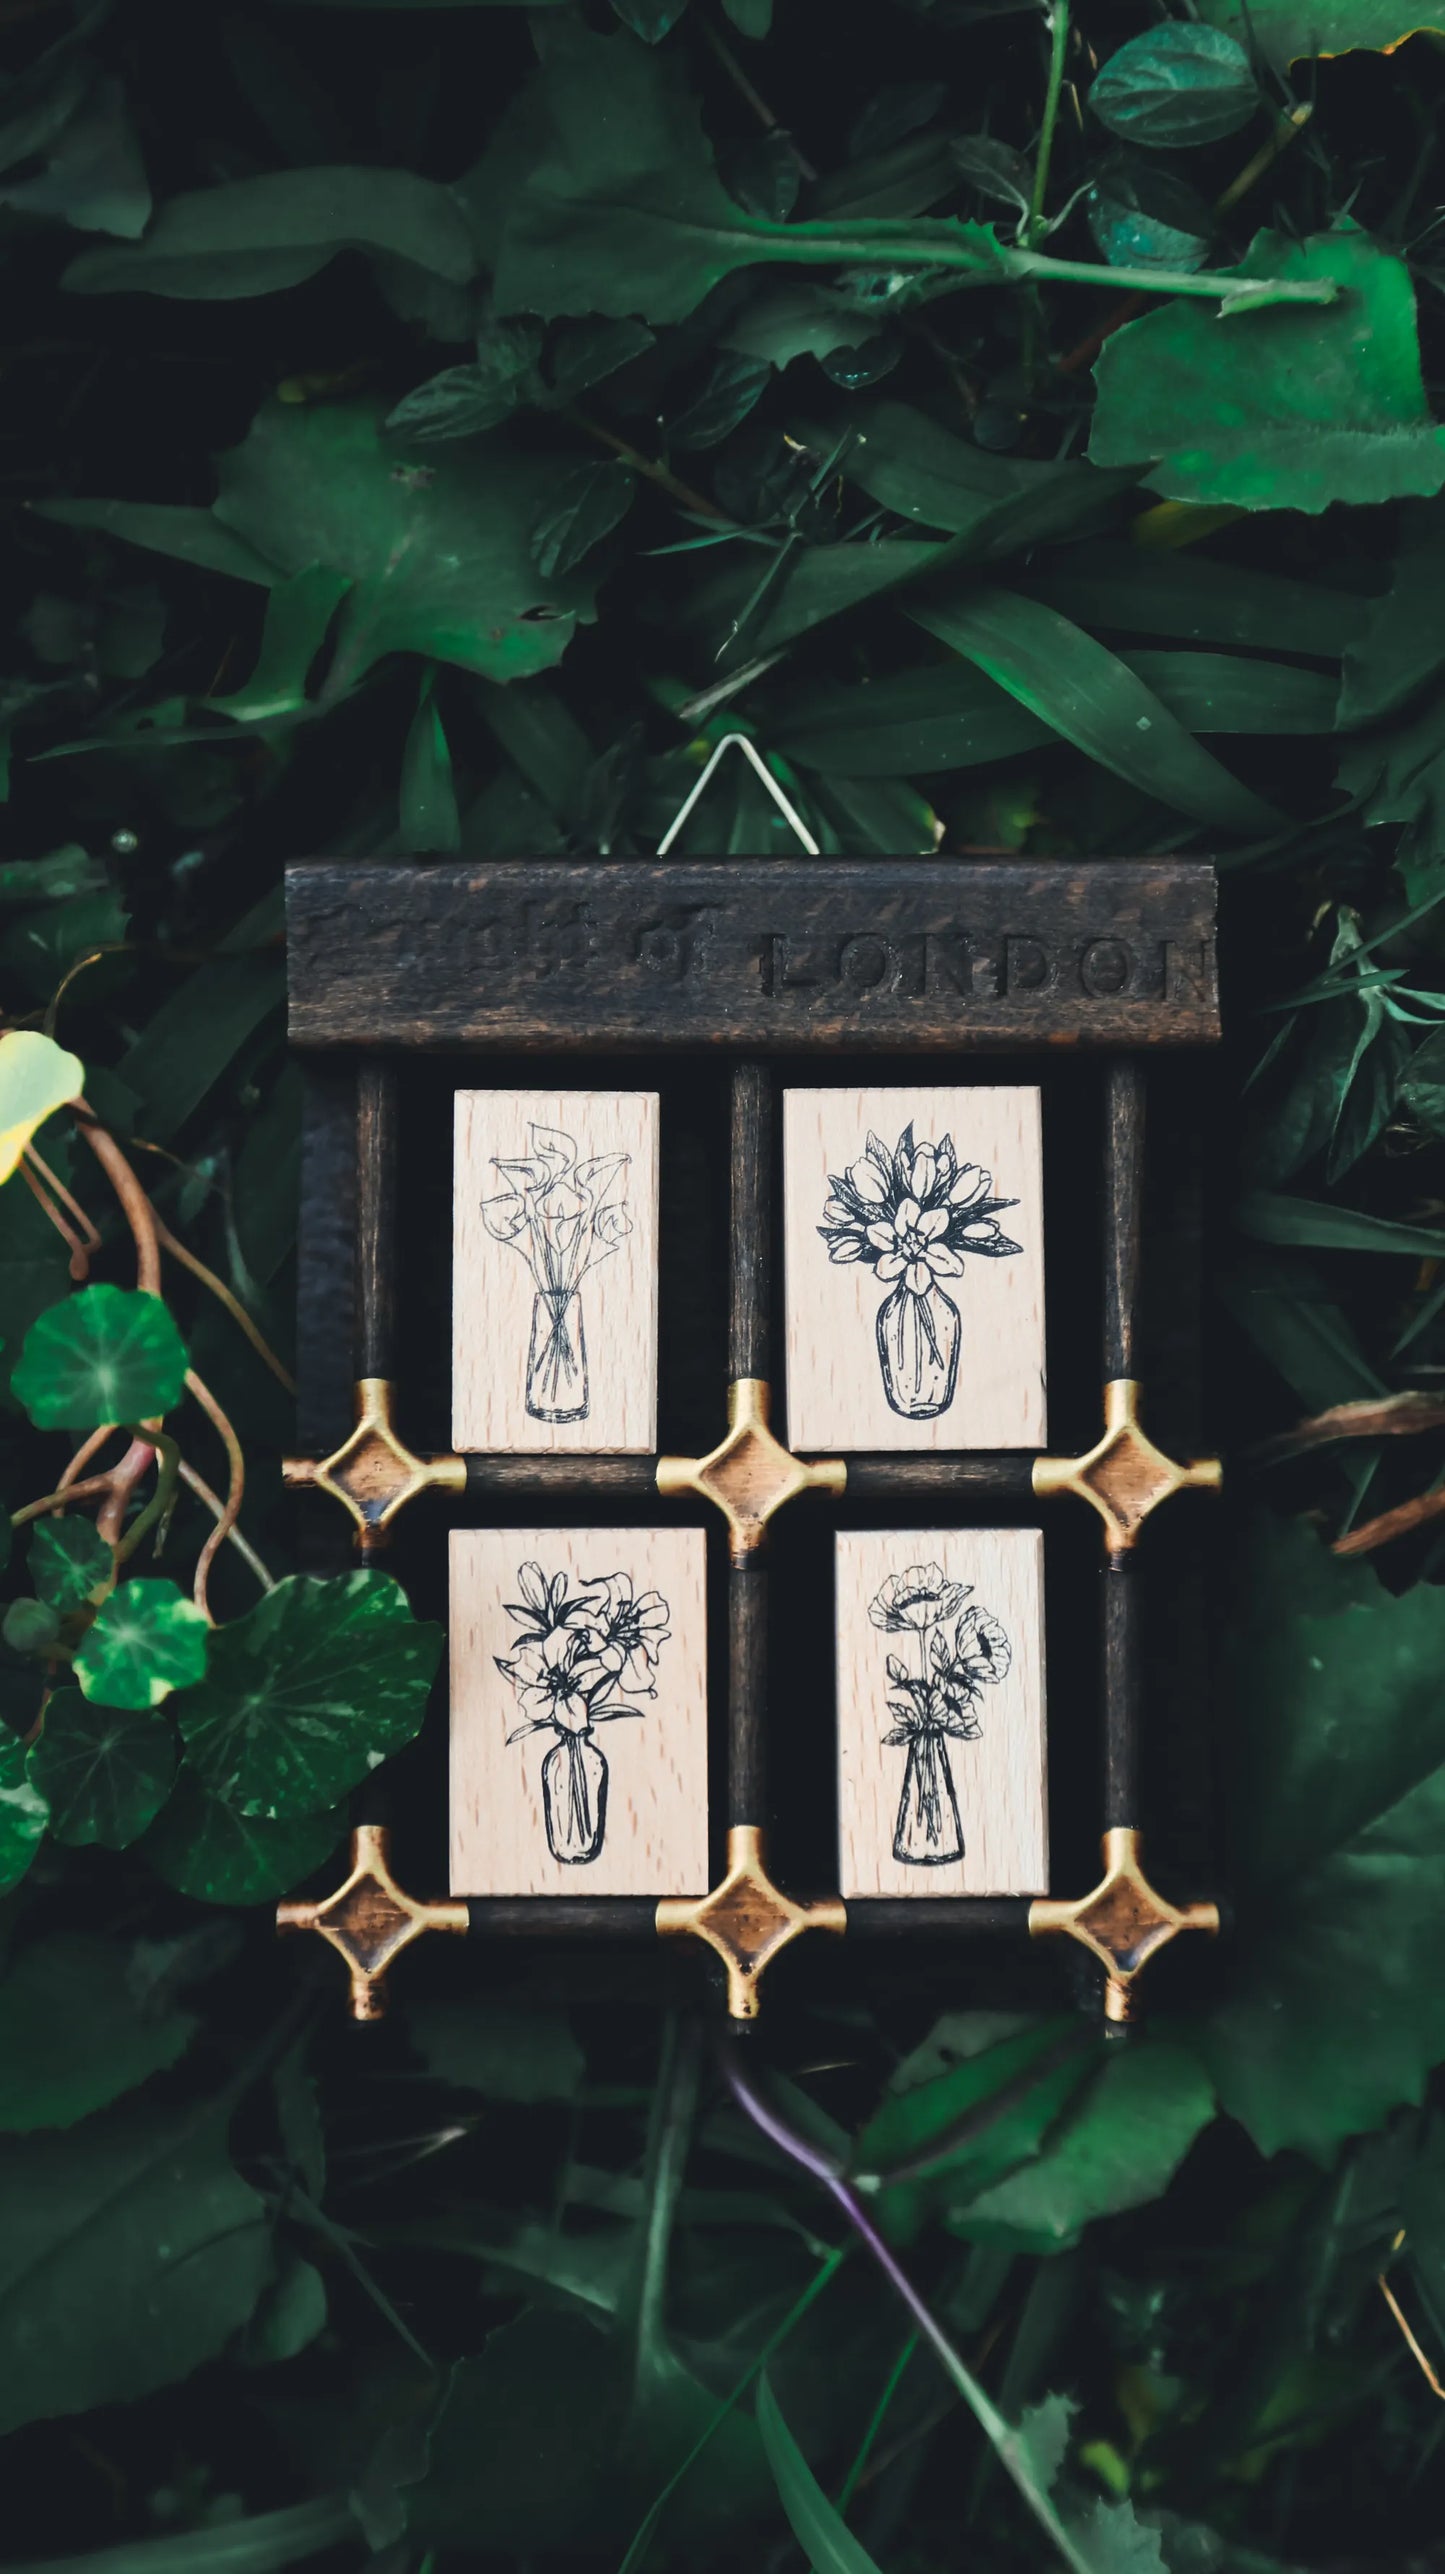 Modaizhi Little View Potted Plants Stamp Set // 2 Options